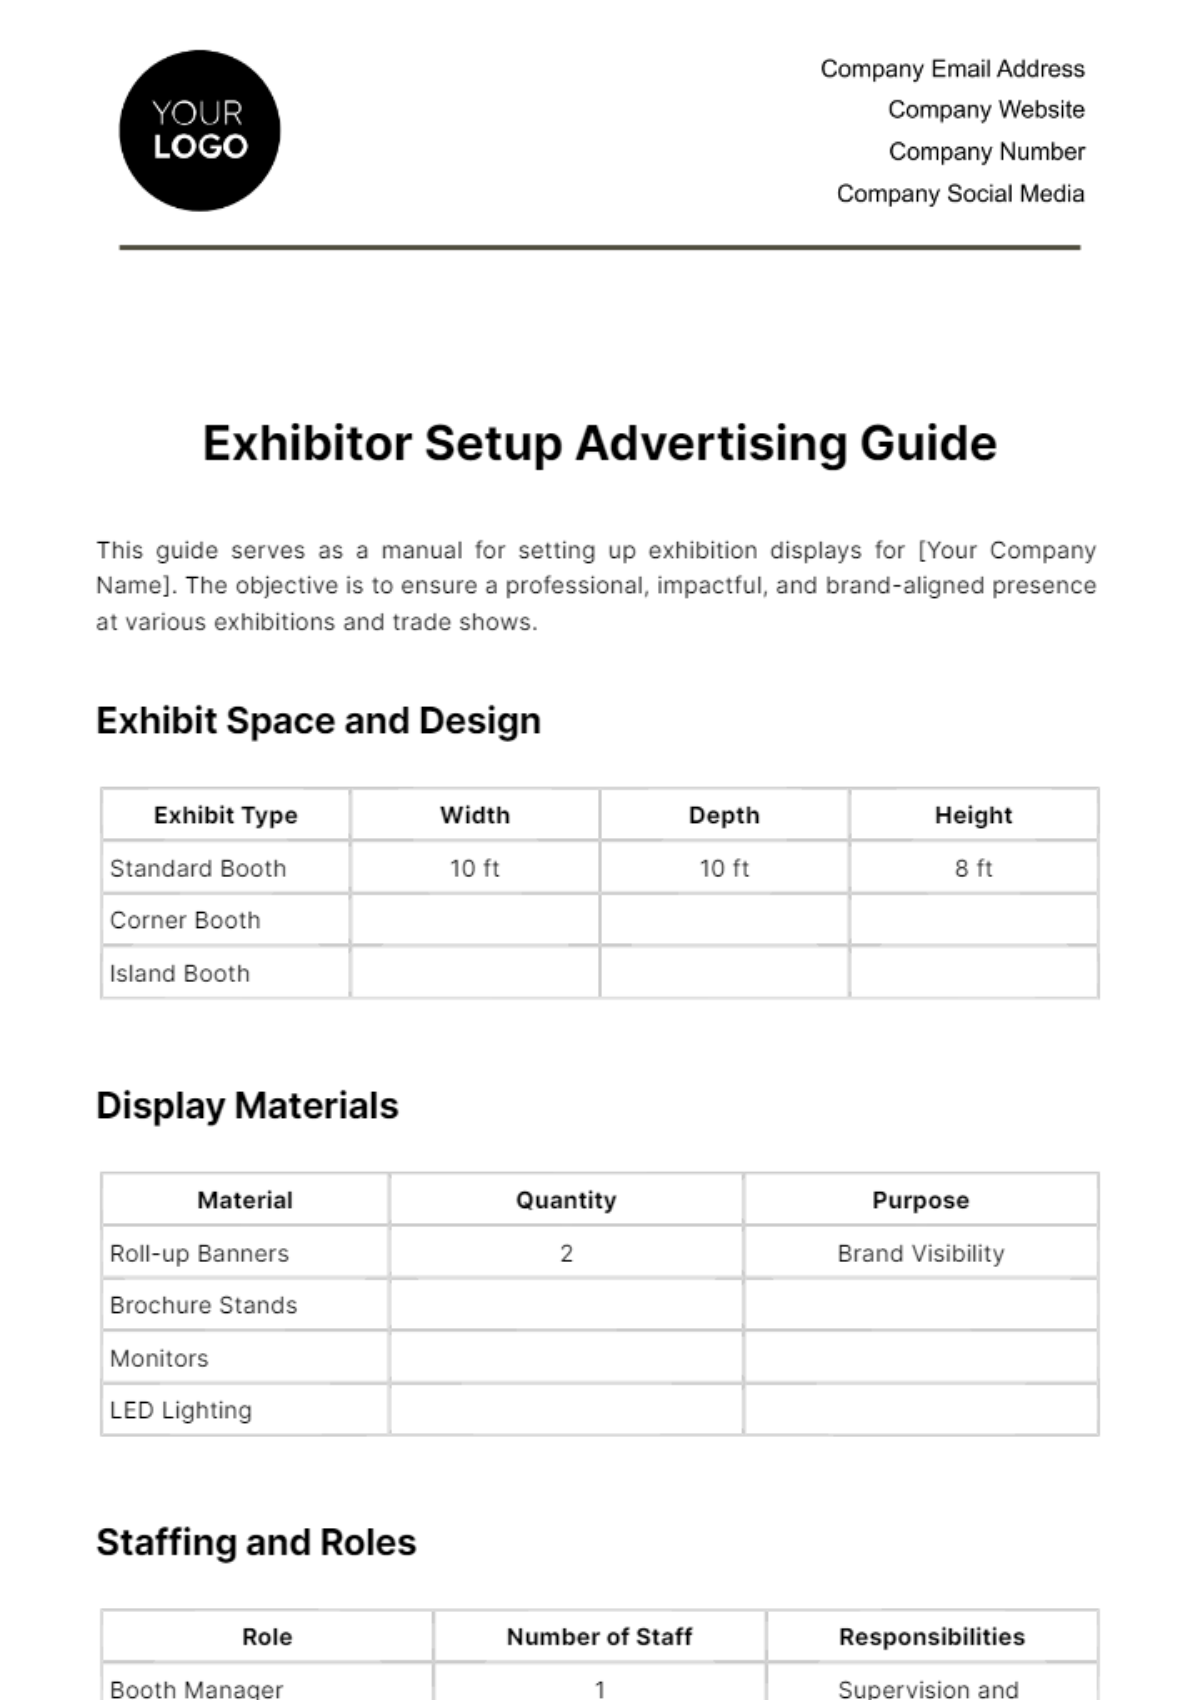 Exhibitor Setup Advertising Guide Template